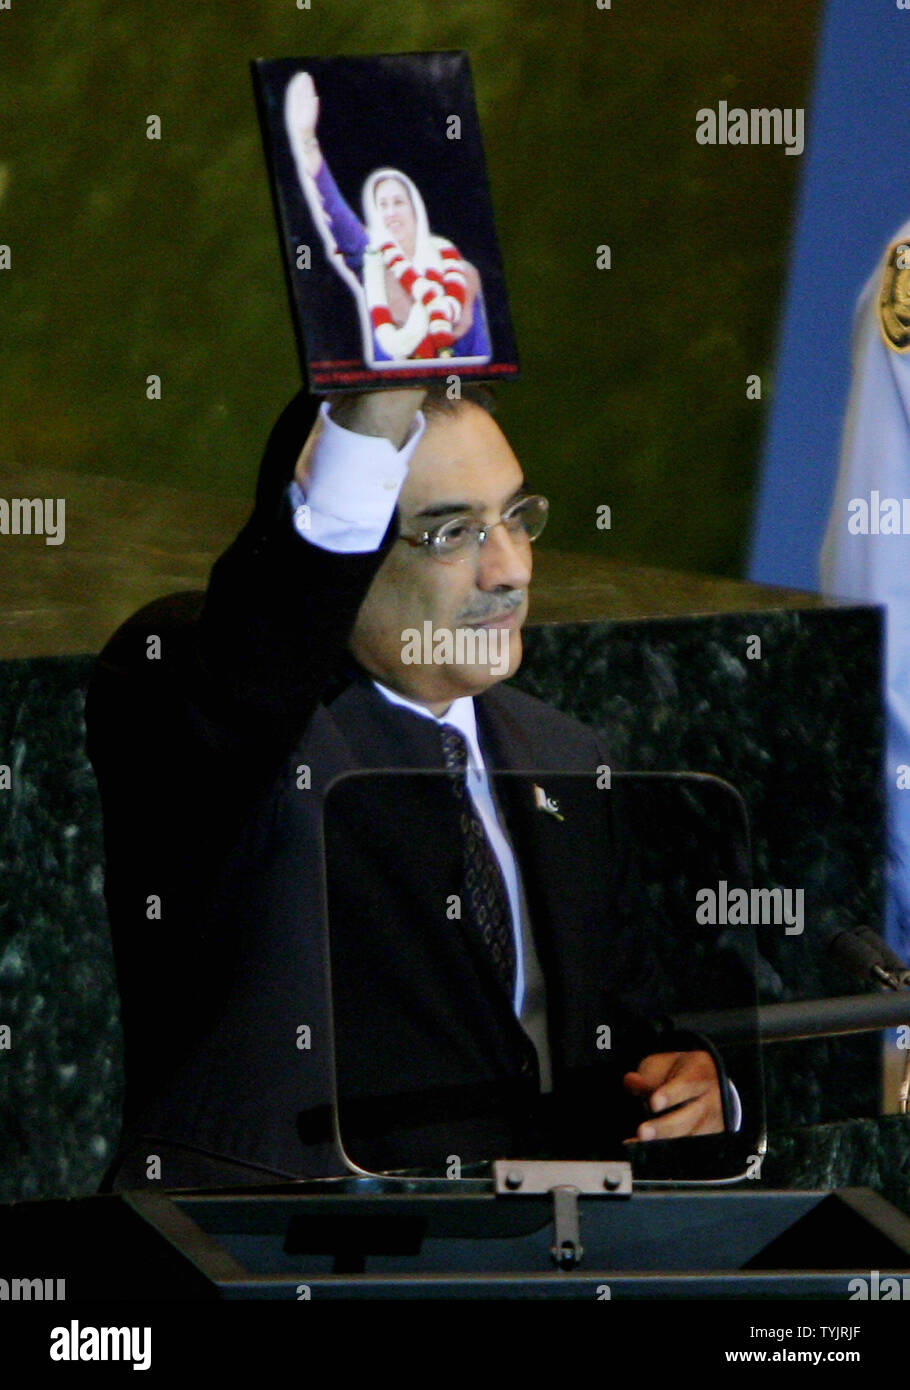 Asif Ali Zardari, President of Pakistan and husband of Benazir Bhutto, holds up a photo of the assassinated political leader as he addresses the 63rd session of the General Assembly at the UN on September 25, 2008 in New York City. (UPI Photo/Monika Graff) Stock Photo